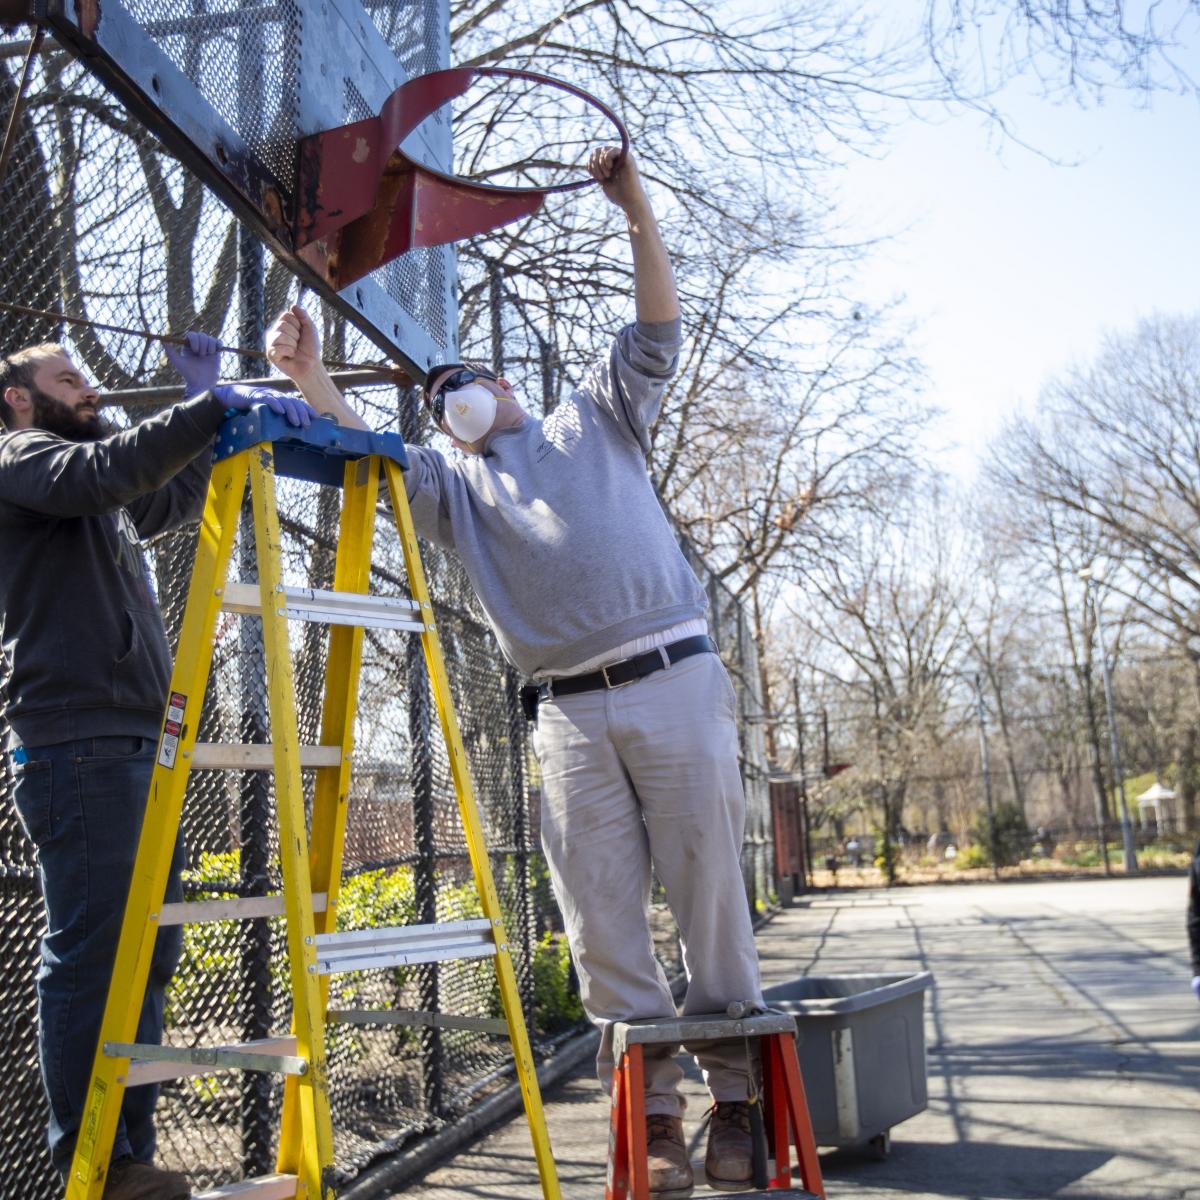 Why Are There So Many Basketball Hoops Without Nets in New York City Parks?  – The Science Survey